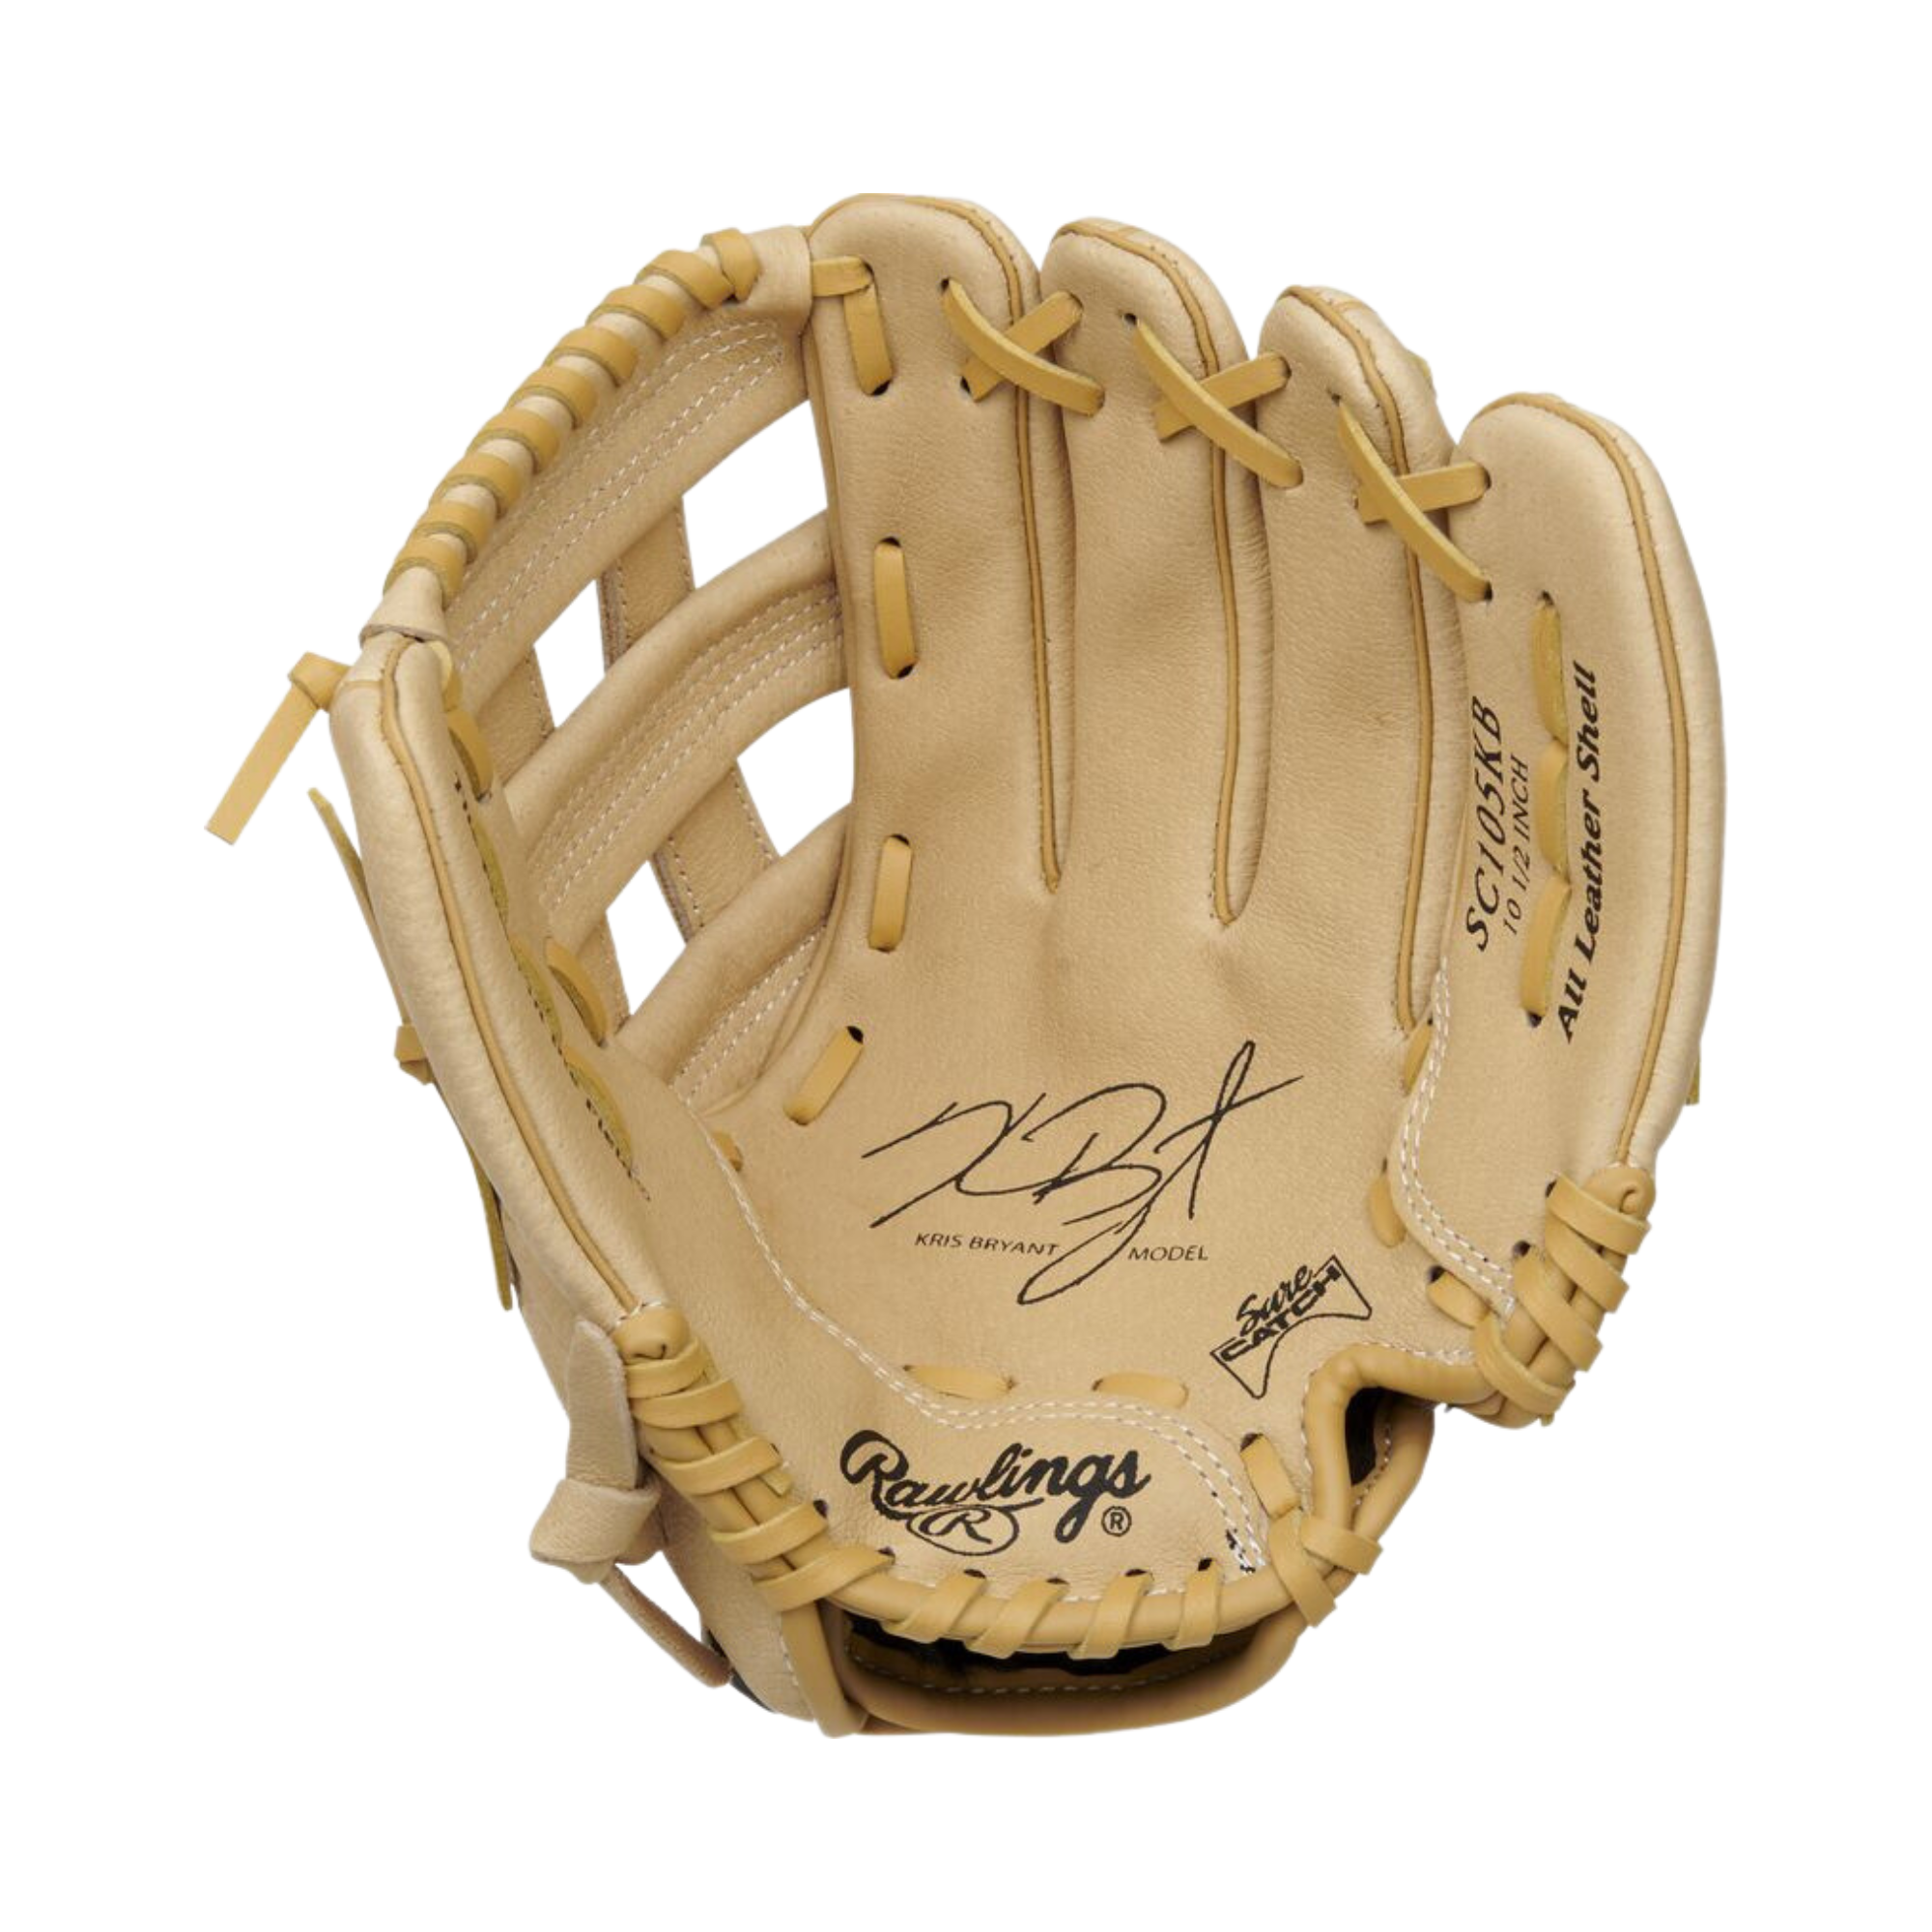 Rawlings Sure Catch 10.5 in Youth Baseball Glove - Throwing Hand:Right